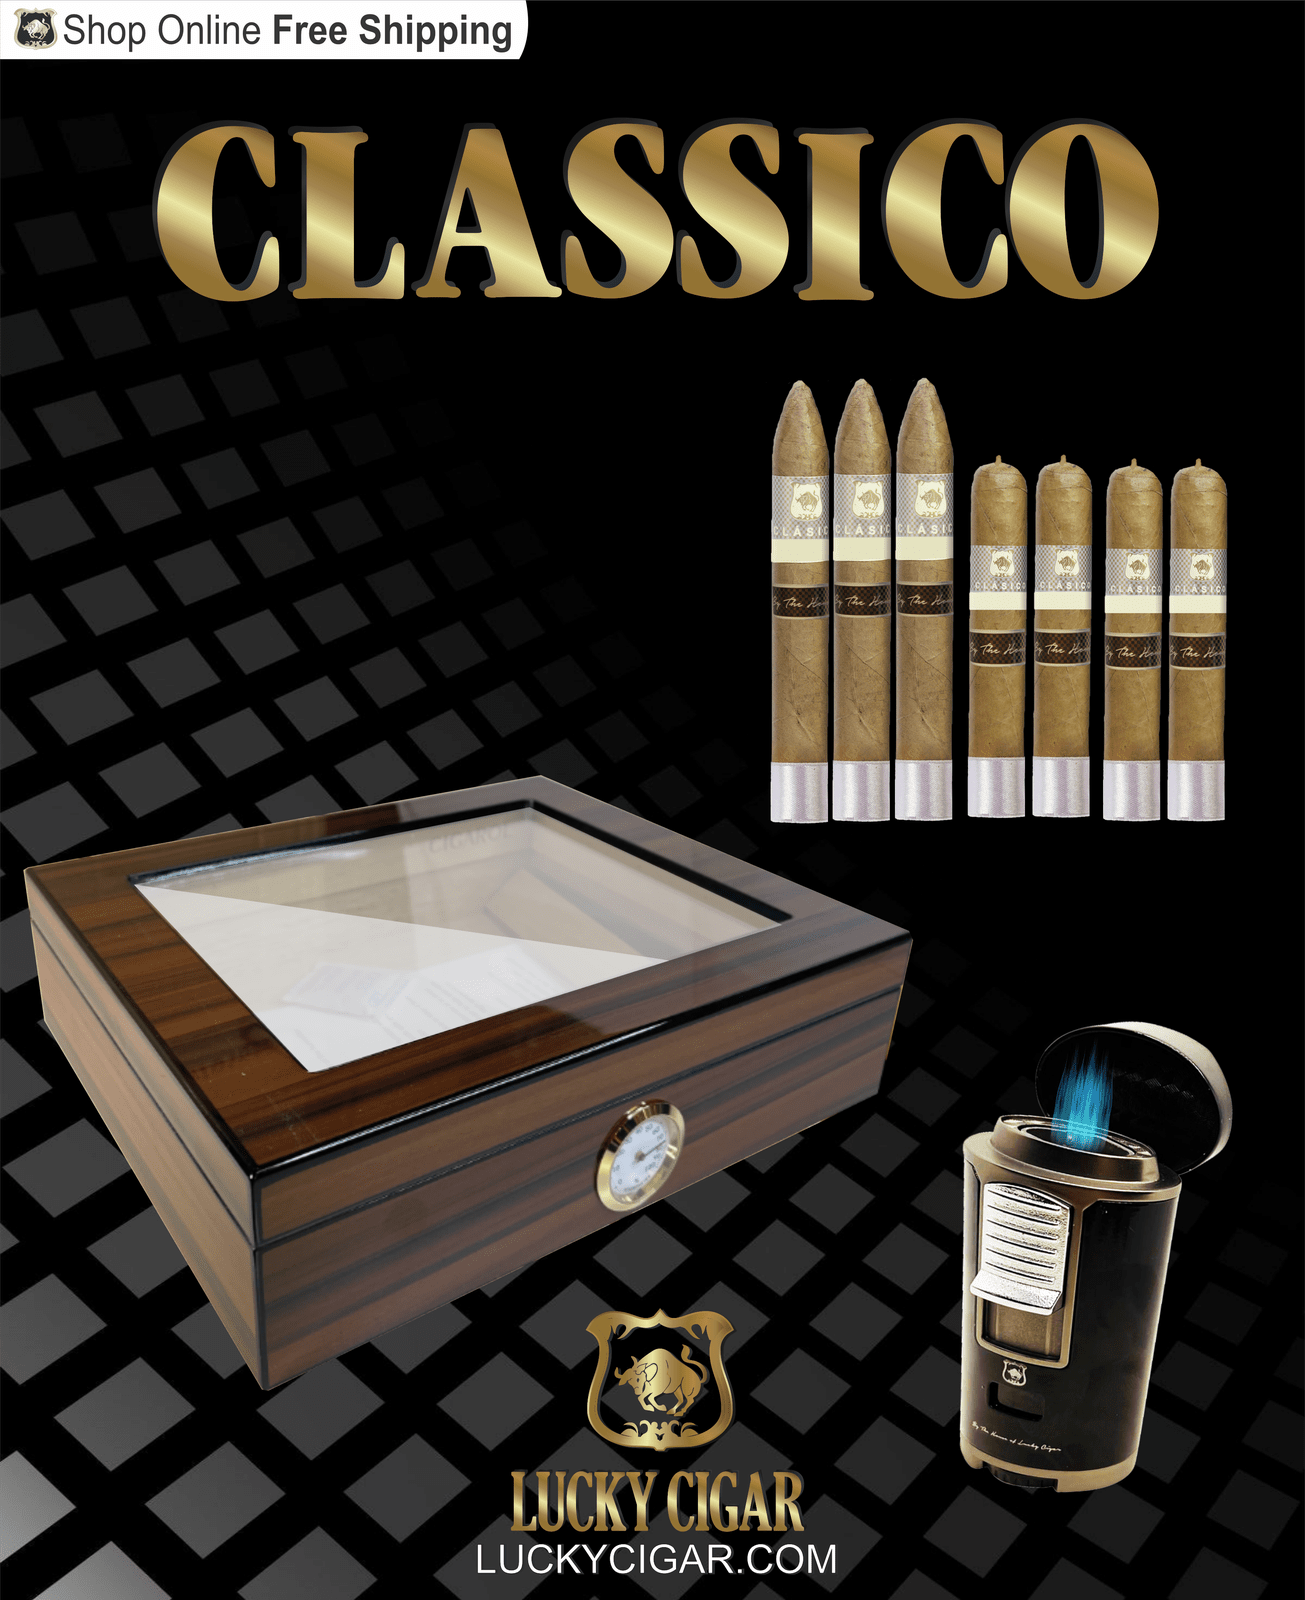 Lucky Cigar Sampler Sets: Set of 7 Classico Cigars with Table Torch, Desk Humidor